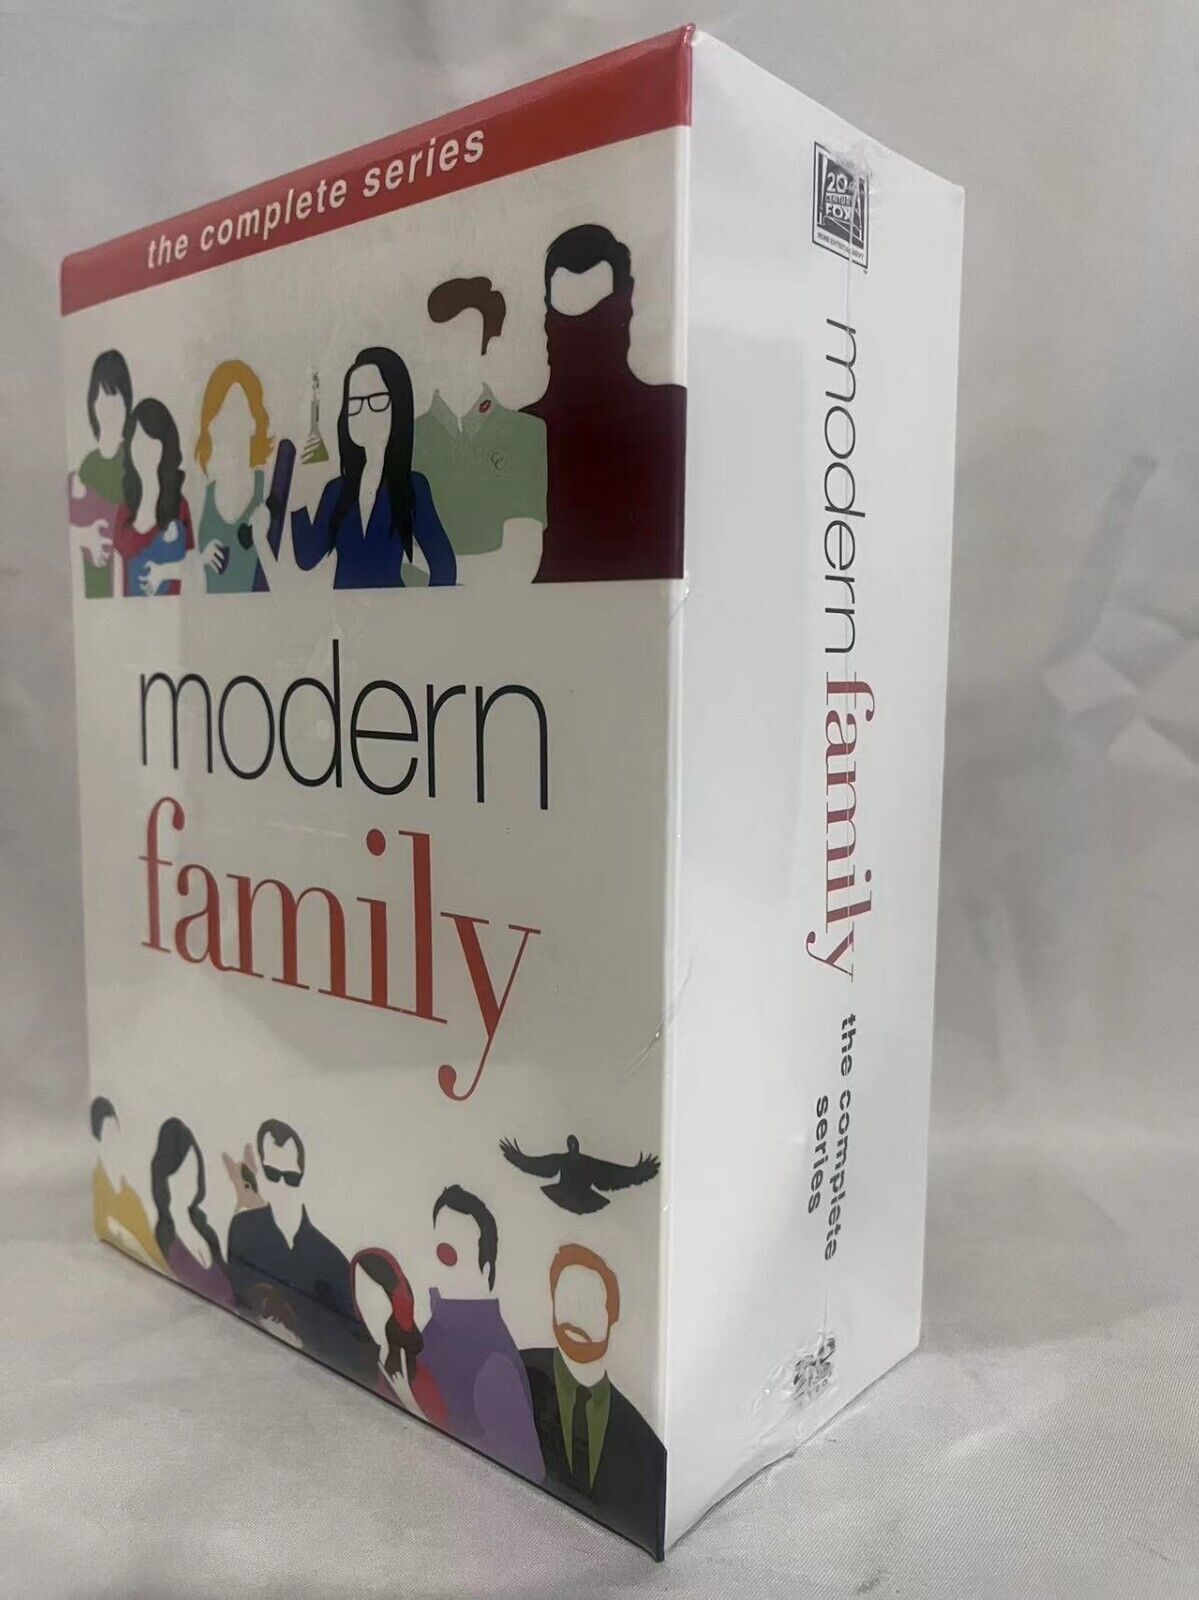 Modern Family Complete Series Seasons 1-11 (34-Disc DVD) Brand New & Sealed US